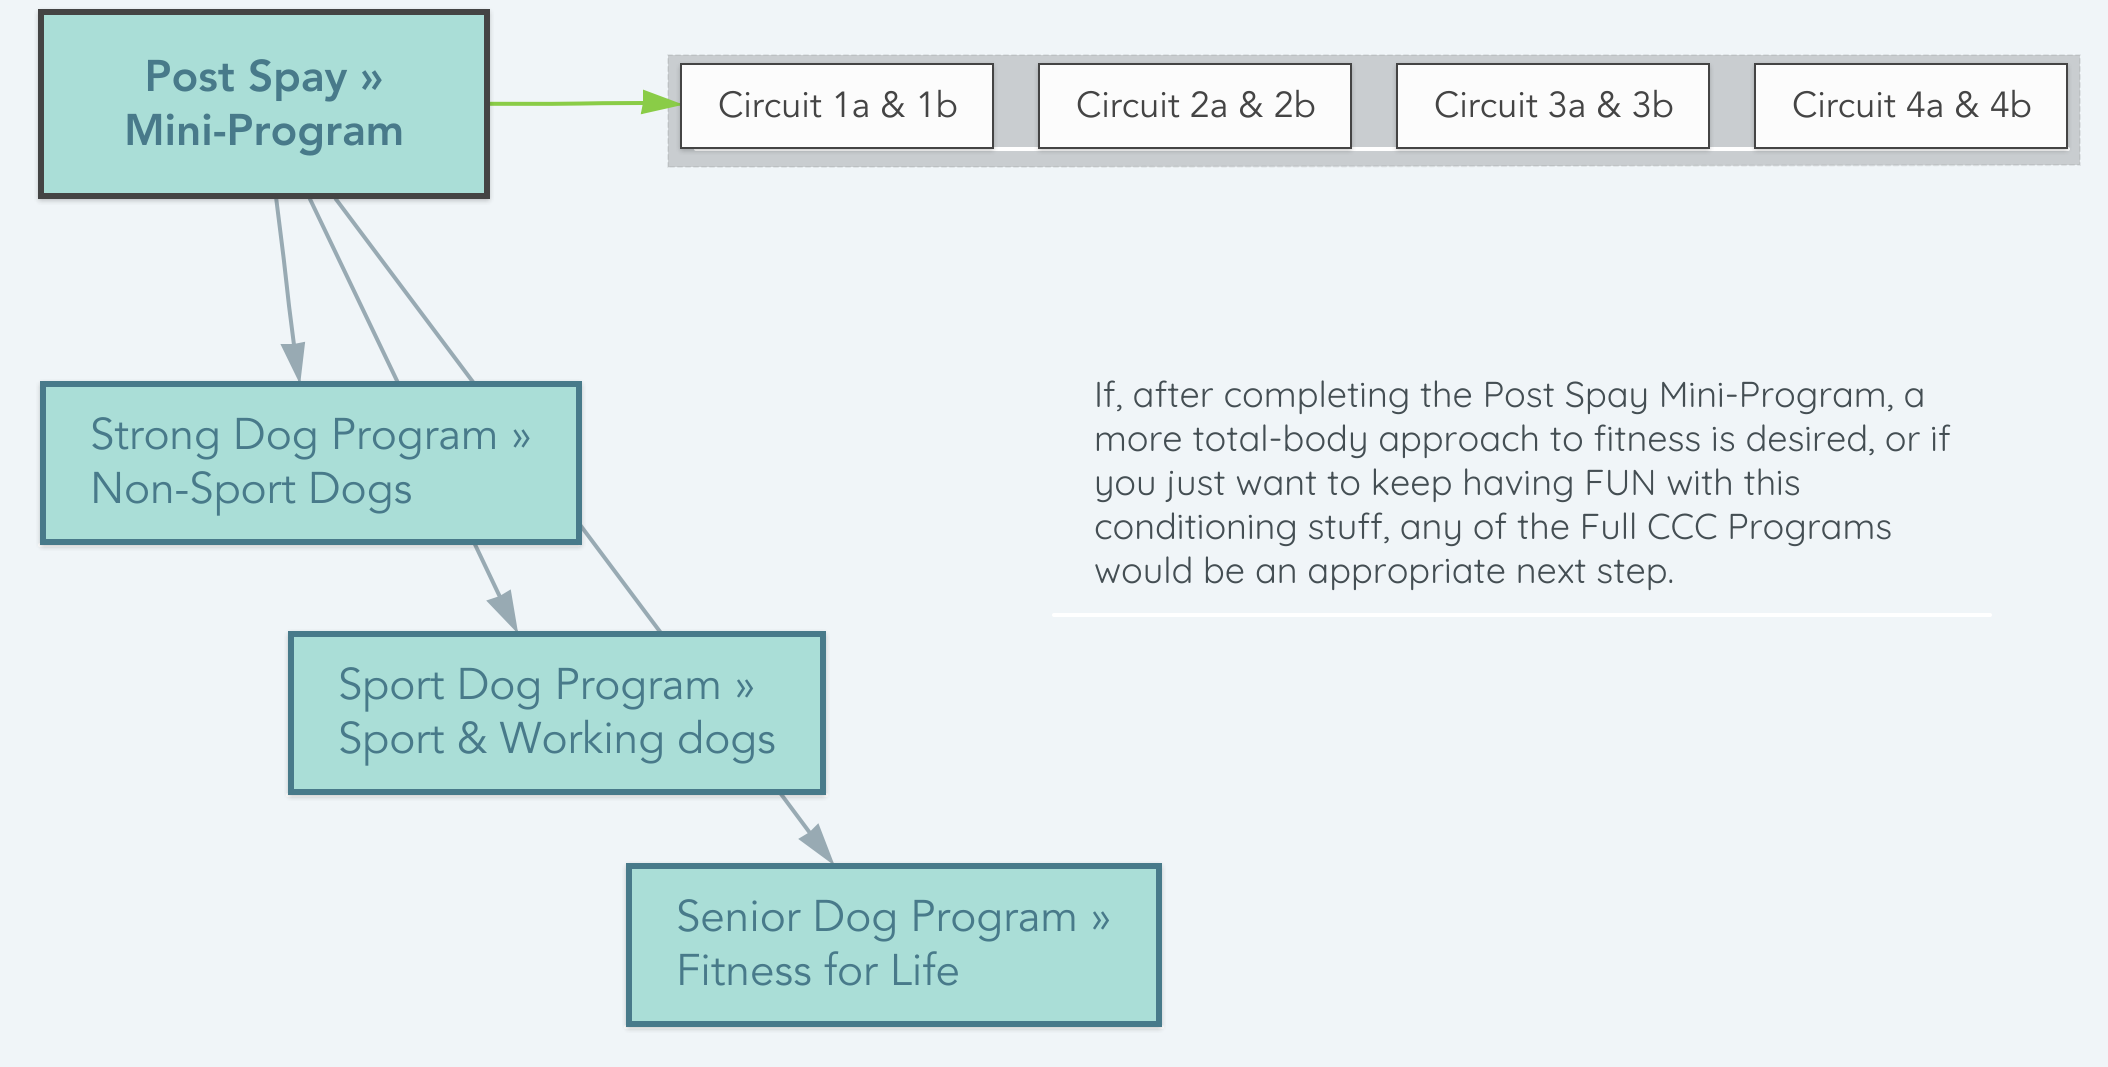 Graphic that details the path through the Post Spay Mini-Program